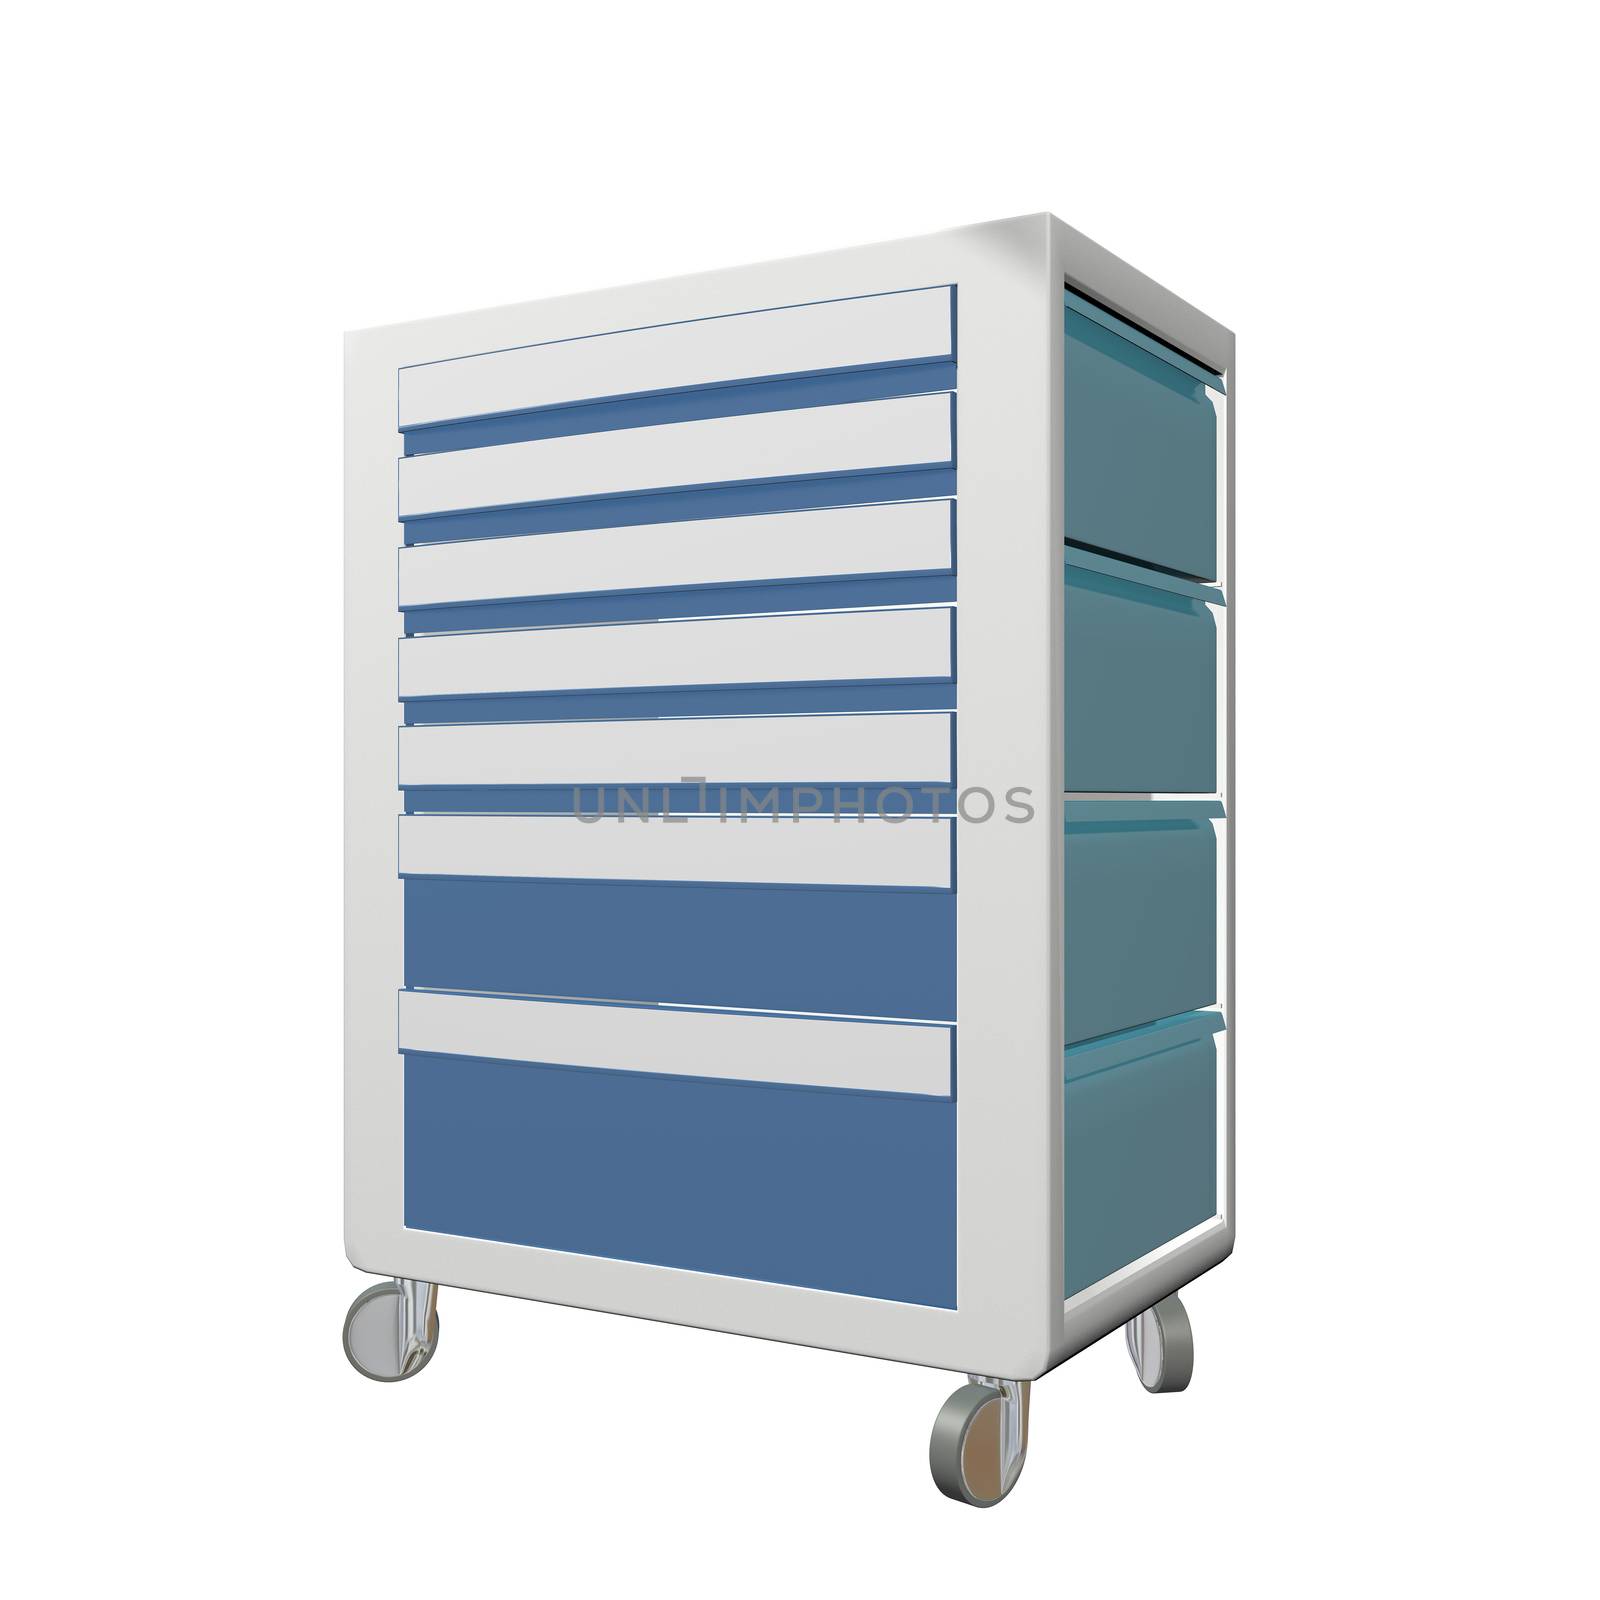 Blue and grey metal medical supply cabinet with wheels, 3D illustration, isolated against a white background